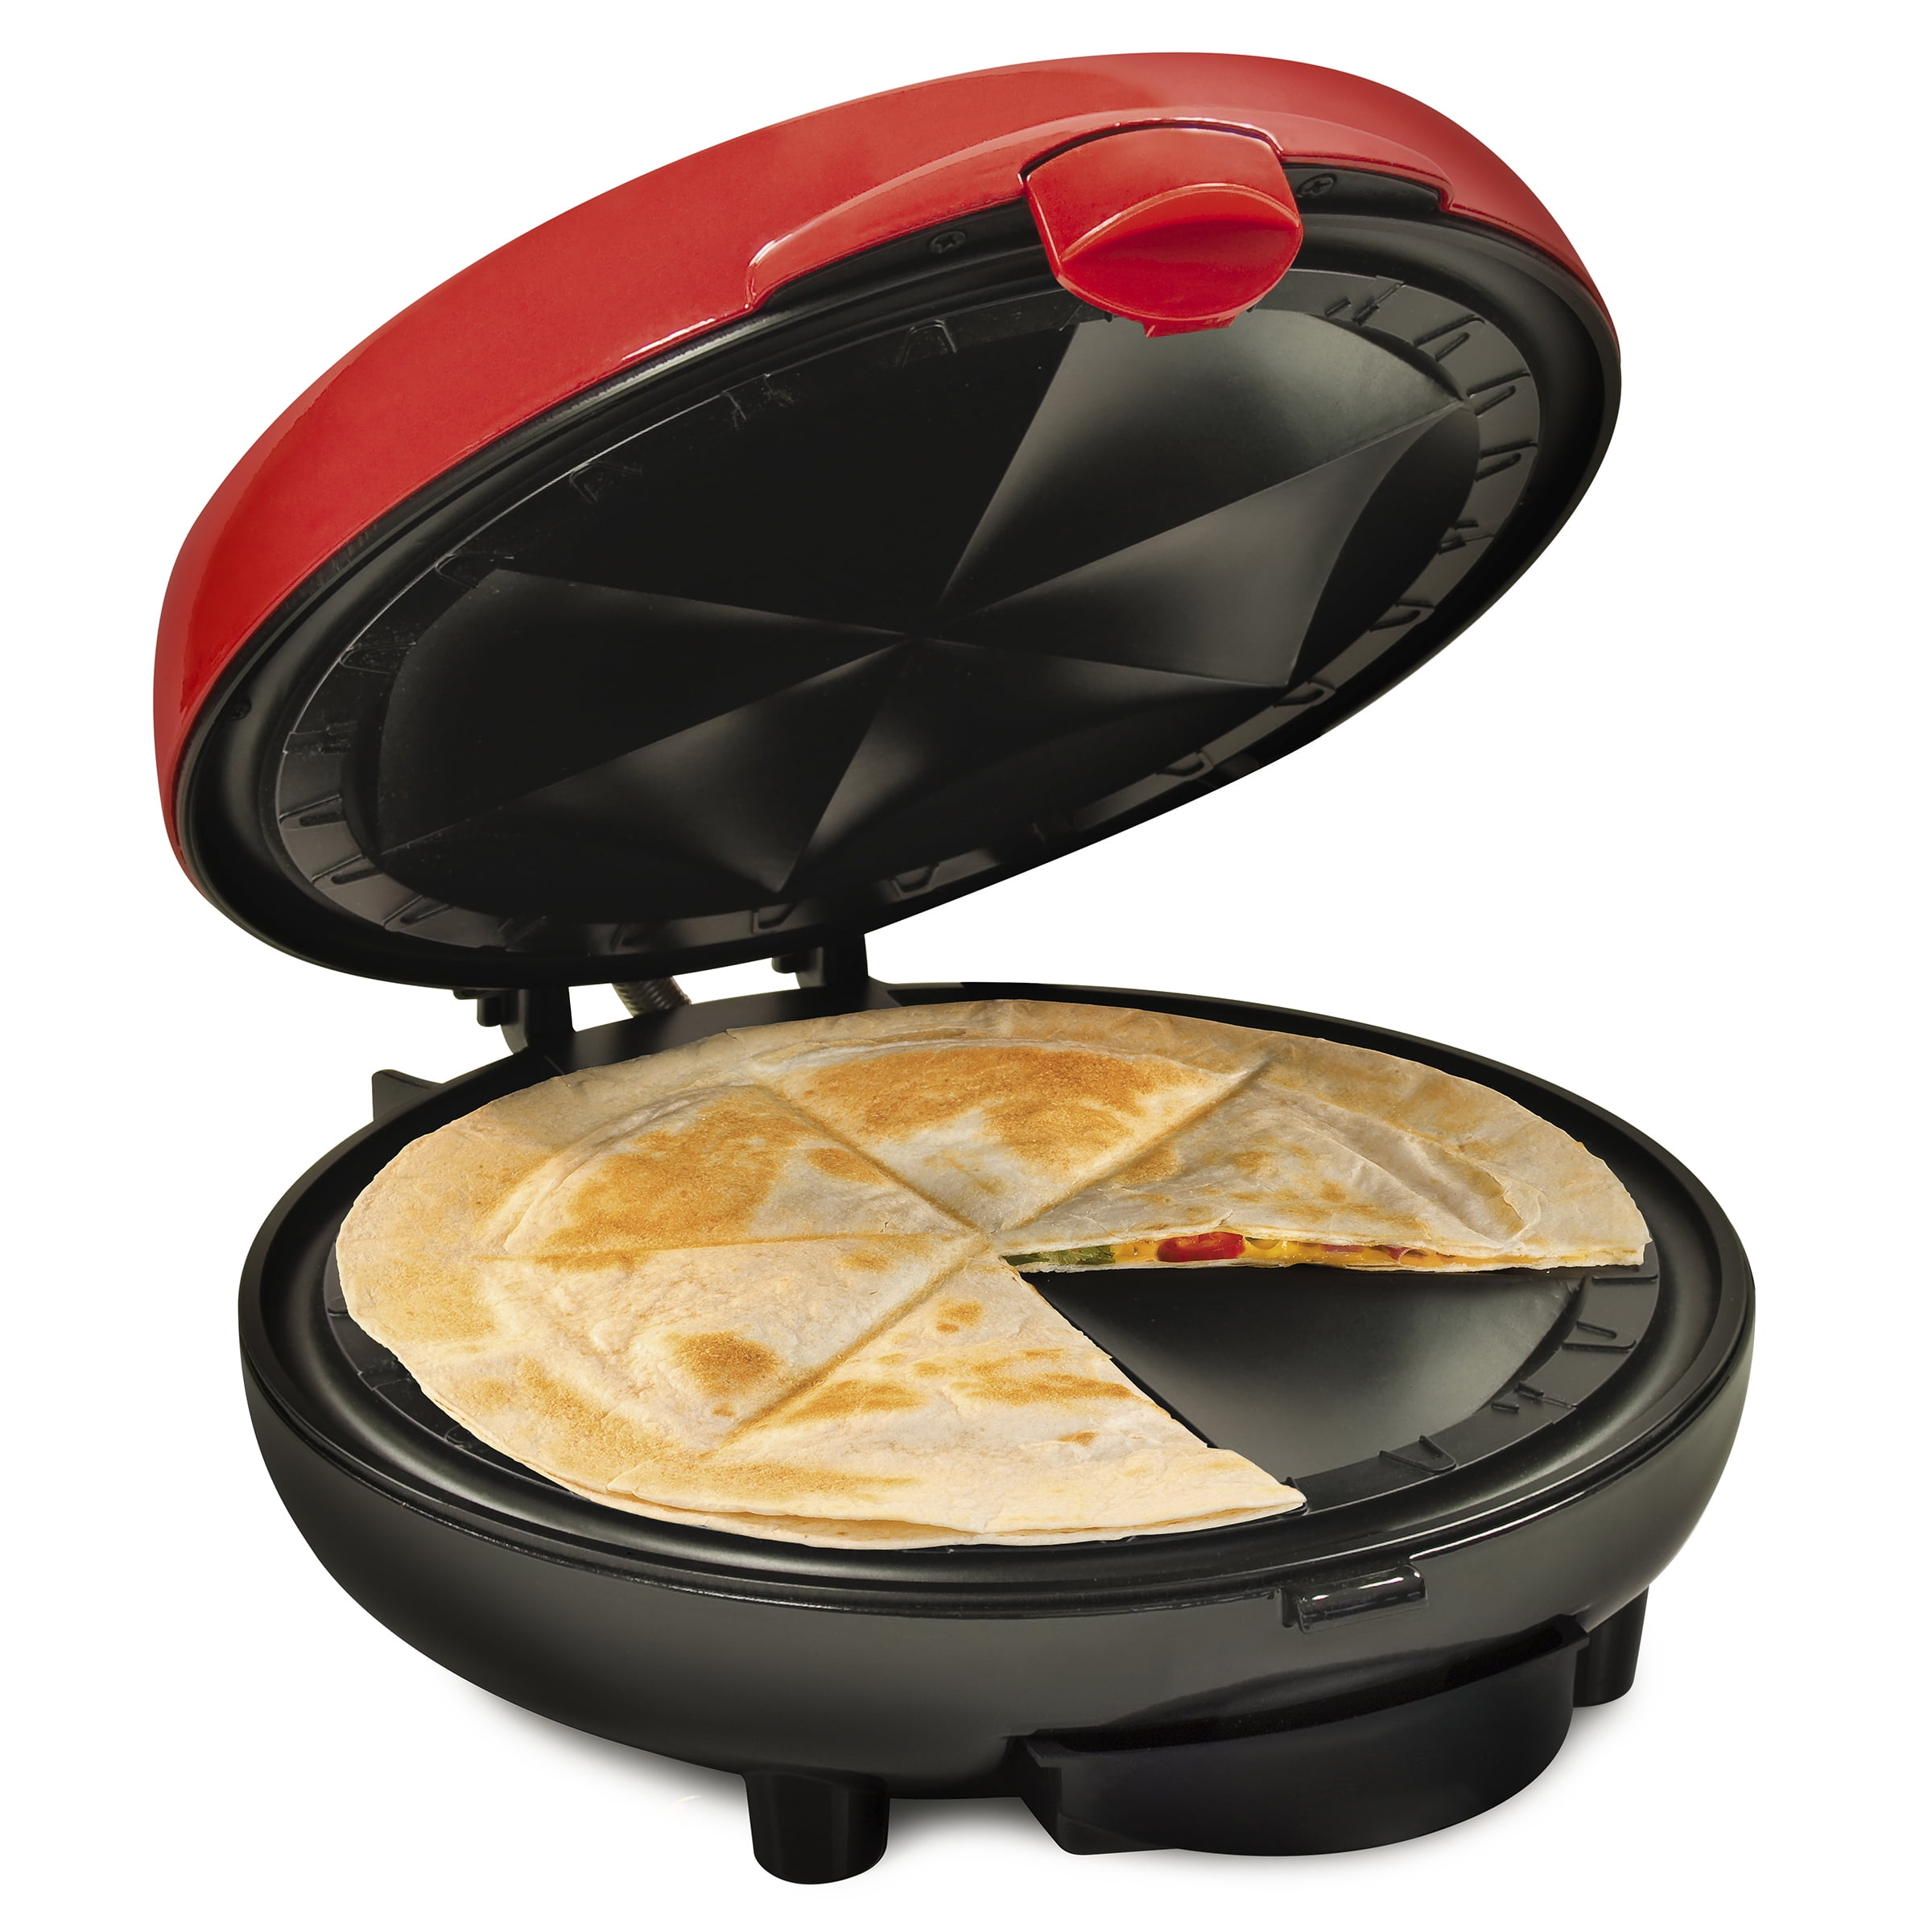  Elite Gourmet EQD413 Non-Stick Electric, Mexican Taco Tuesday Quesadilla  Maker, Easy-Slice 6-Wedge, Grilled Cheese, 8 Inch, Red : Everything Else